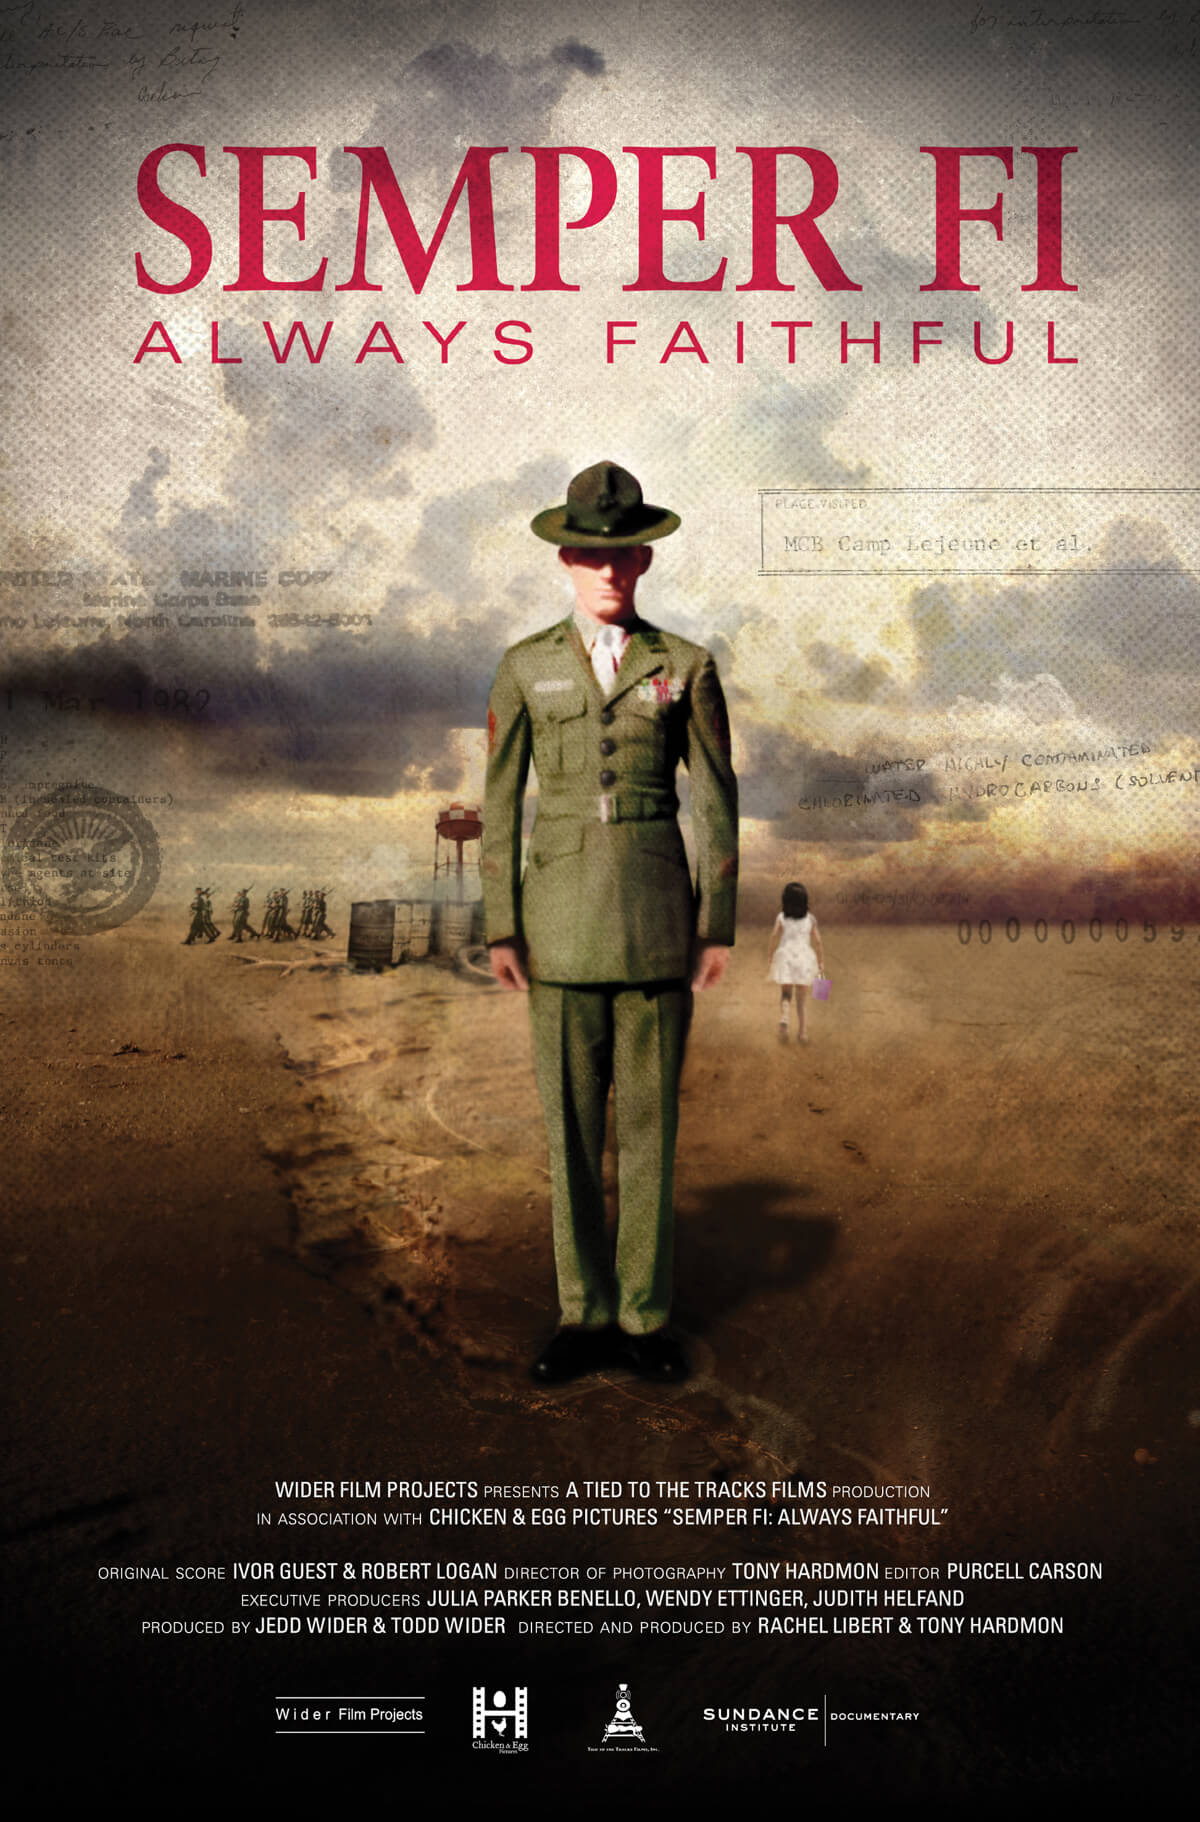 Poster of the film Semper Fi: Always Faithful. Graphic poster; In the foreground, a marine with a uniform is standing; in the background, there is an open land, a small girl dressed in white walking, oil barrels, and soldiers marching.